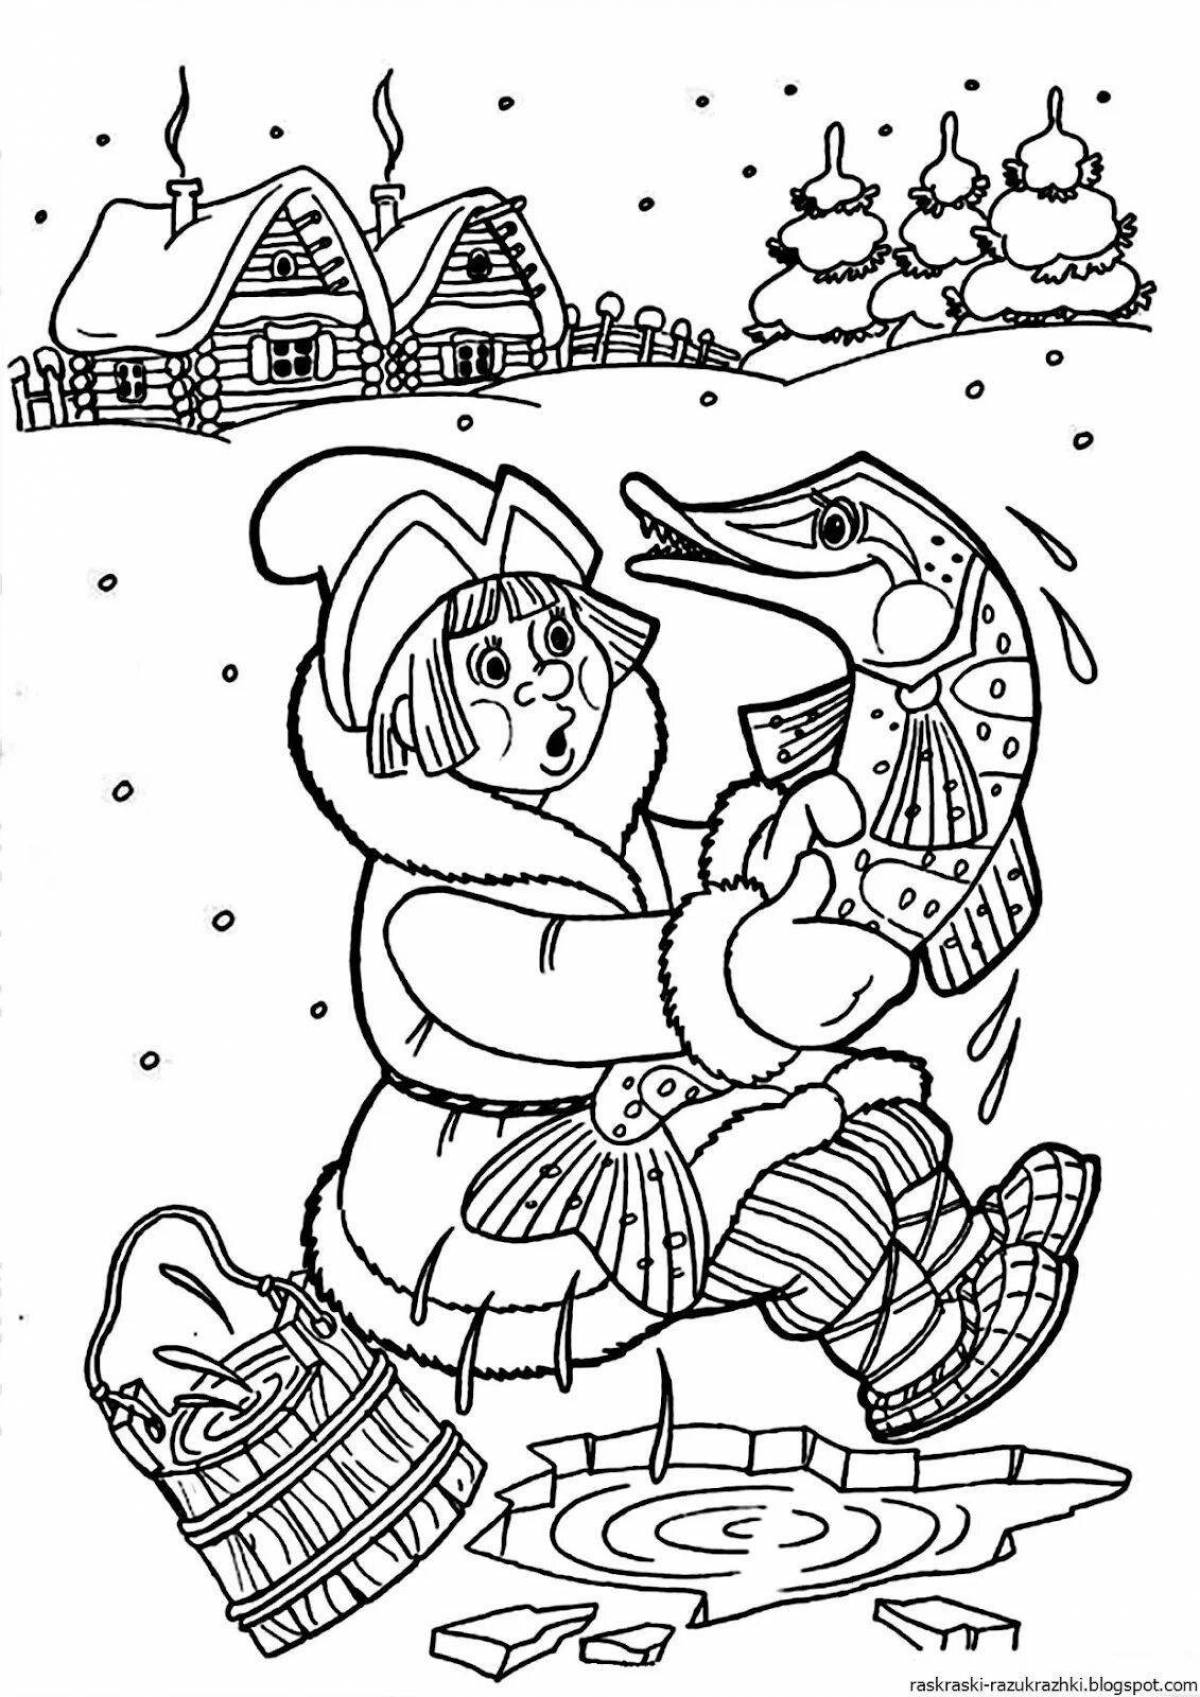 A fascinating coloring book for Russian folk tales